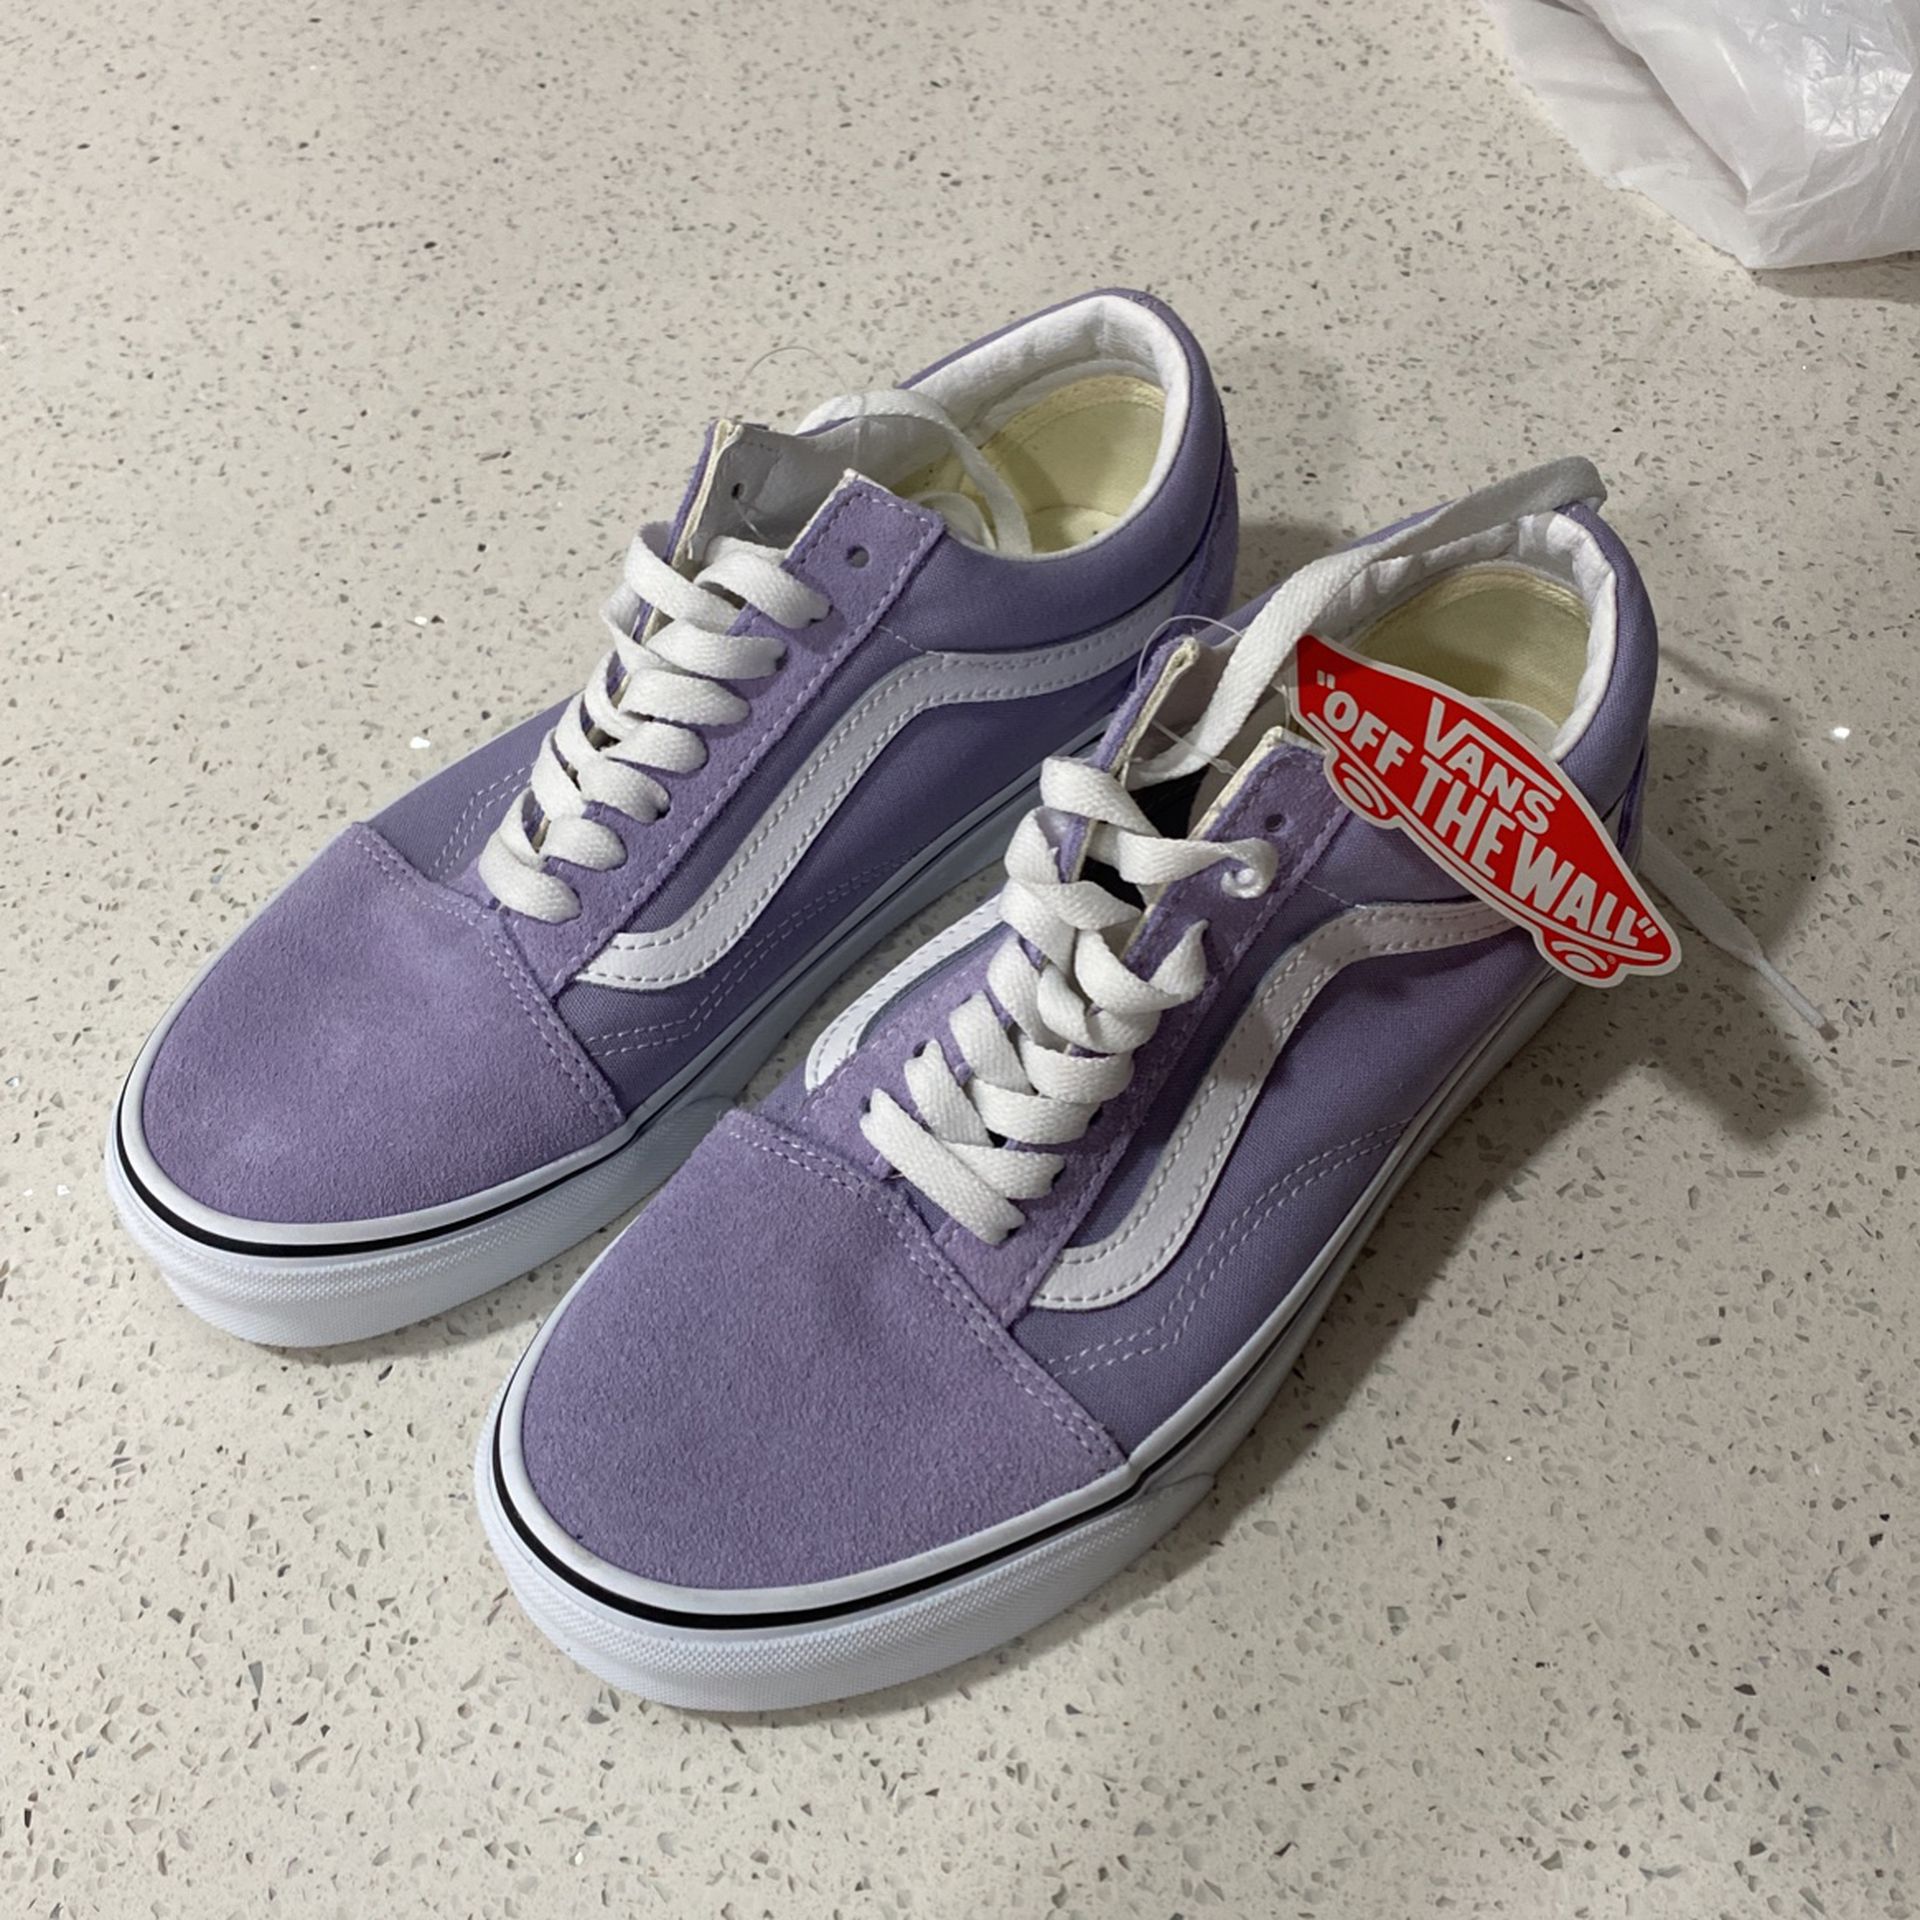 Vans Shoes Available for in Miami, FL - OfferUp